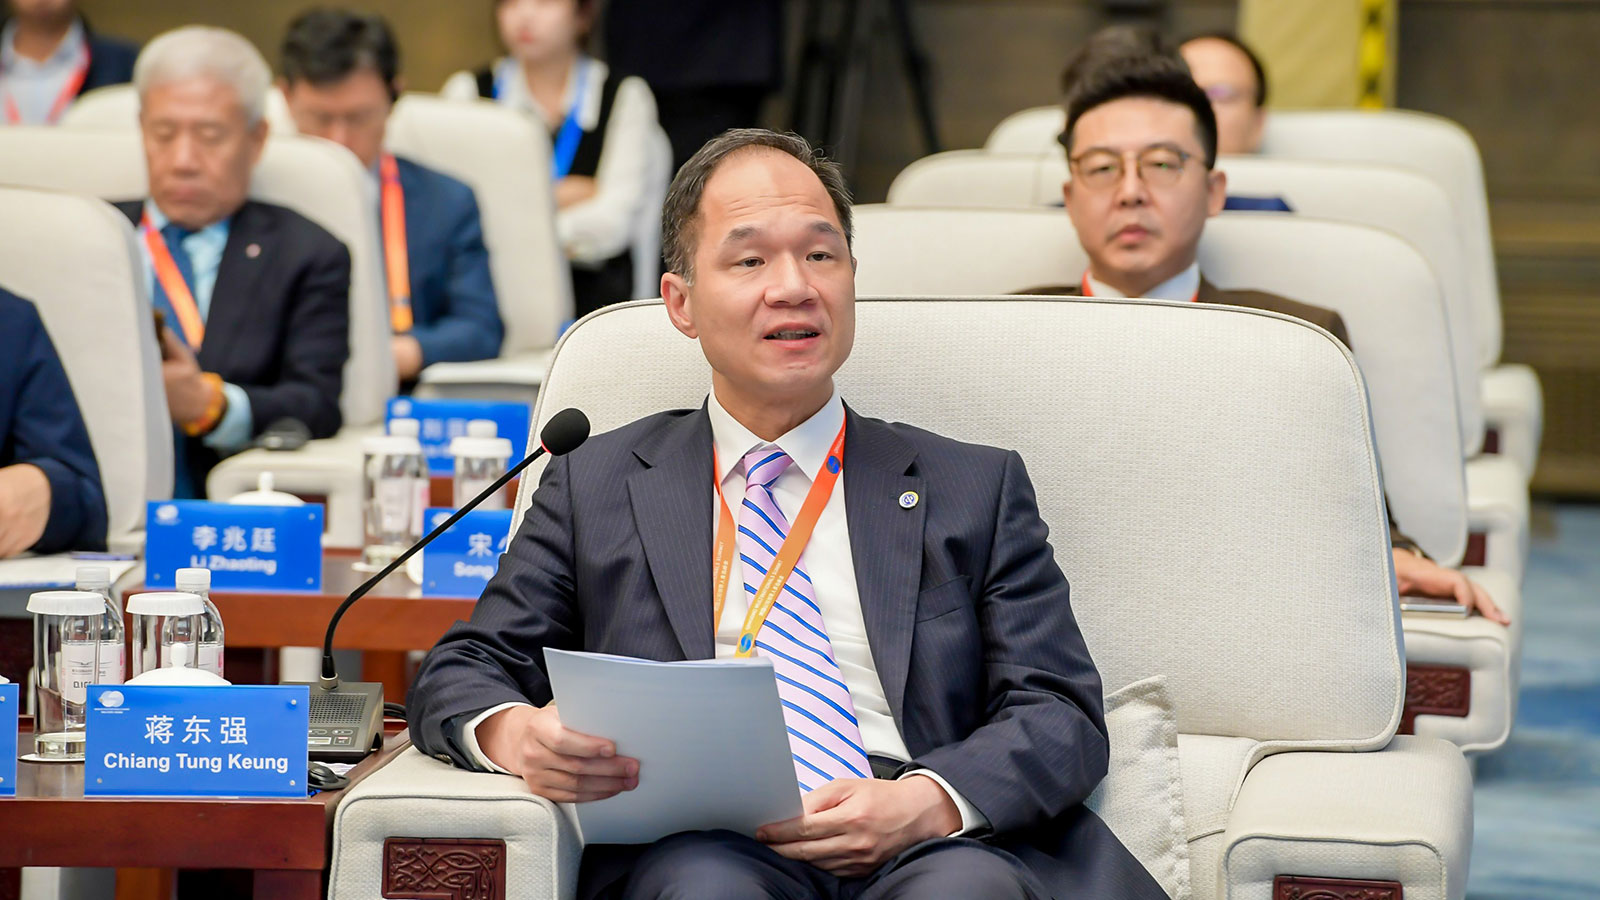 CEO T.K. Chiang delivers an address at the Fourth Qingdao Multinationals Summit